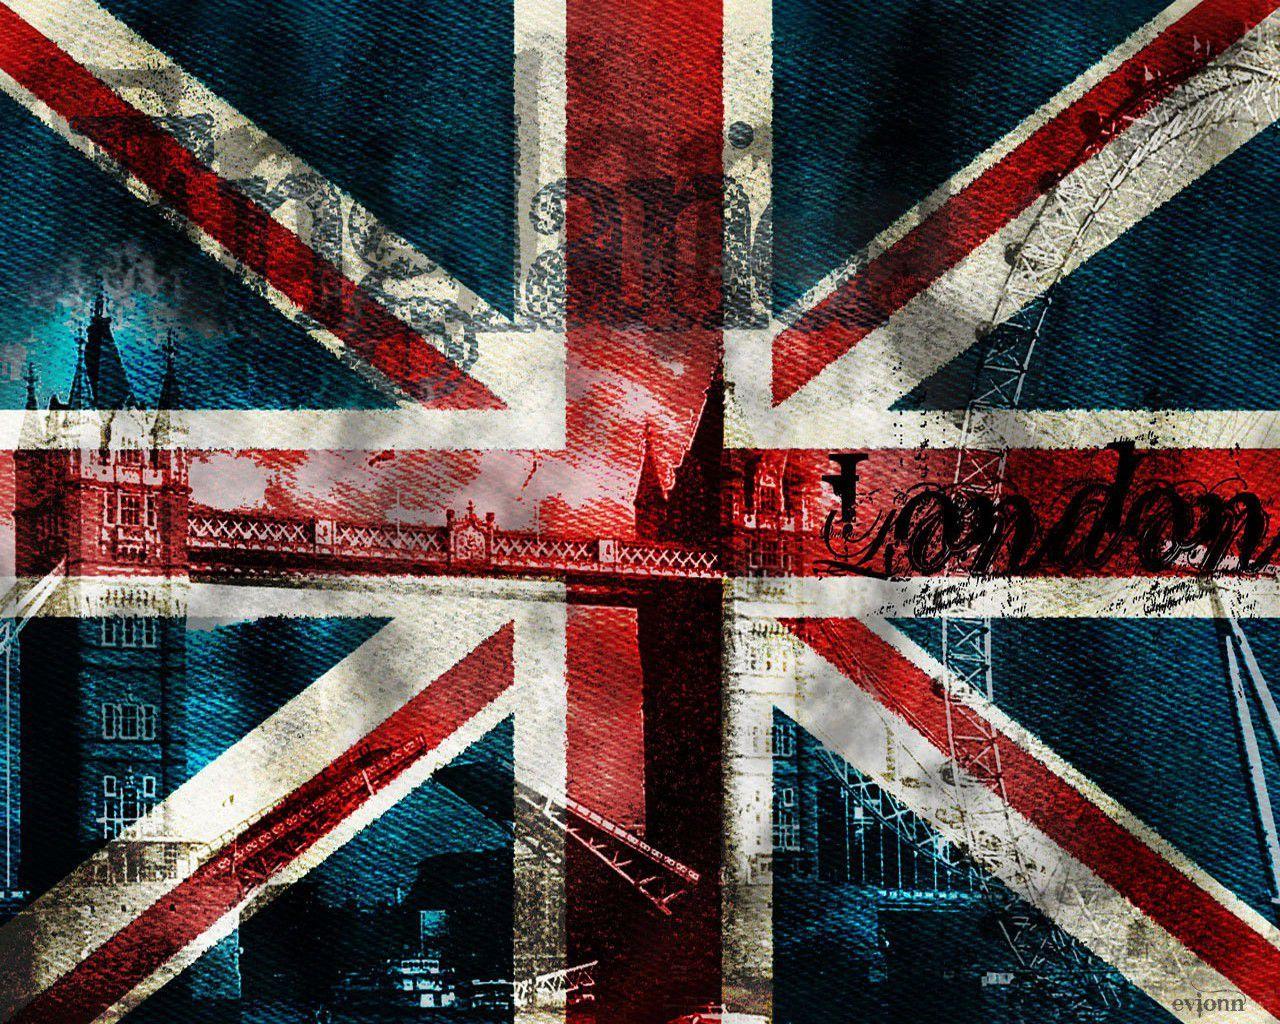 England Flag Wallpapers For Iphone - Wallpaper Cave